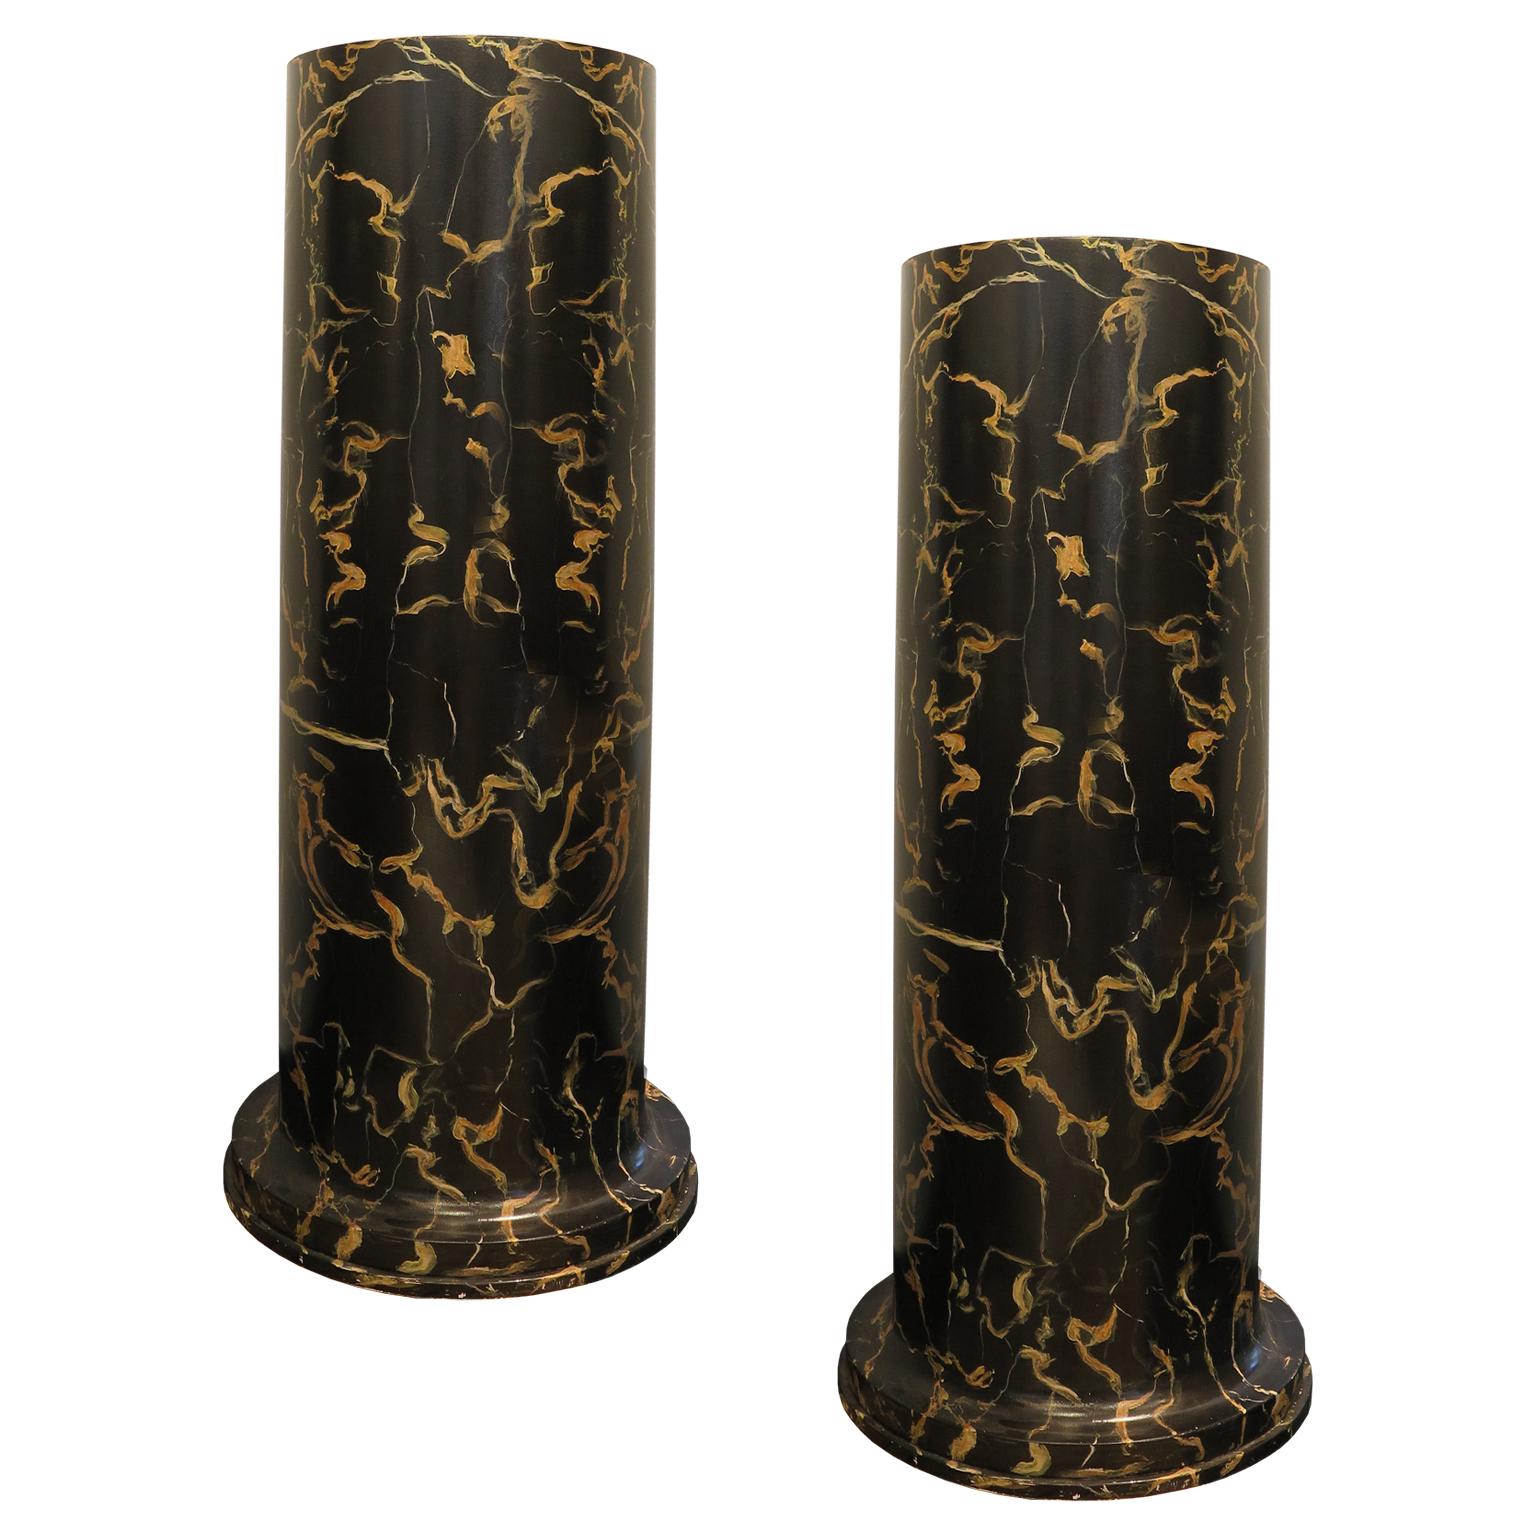 Pair of Italian Mid-Century Pedestals with Hand-Painted Marble Motif